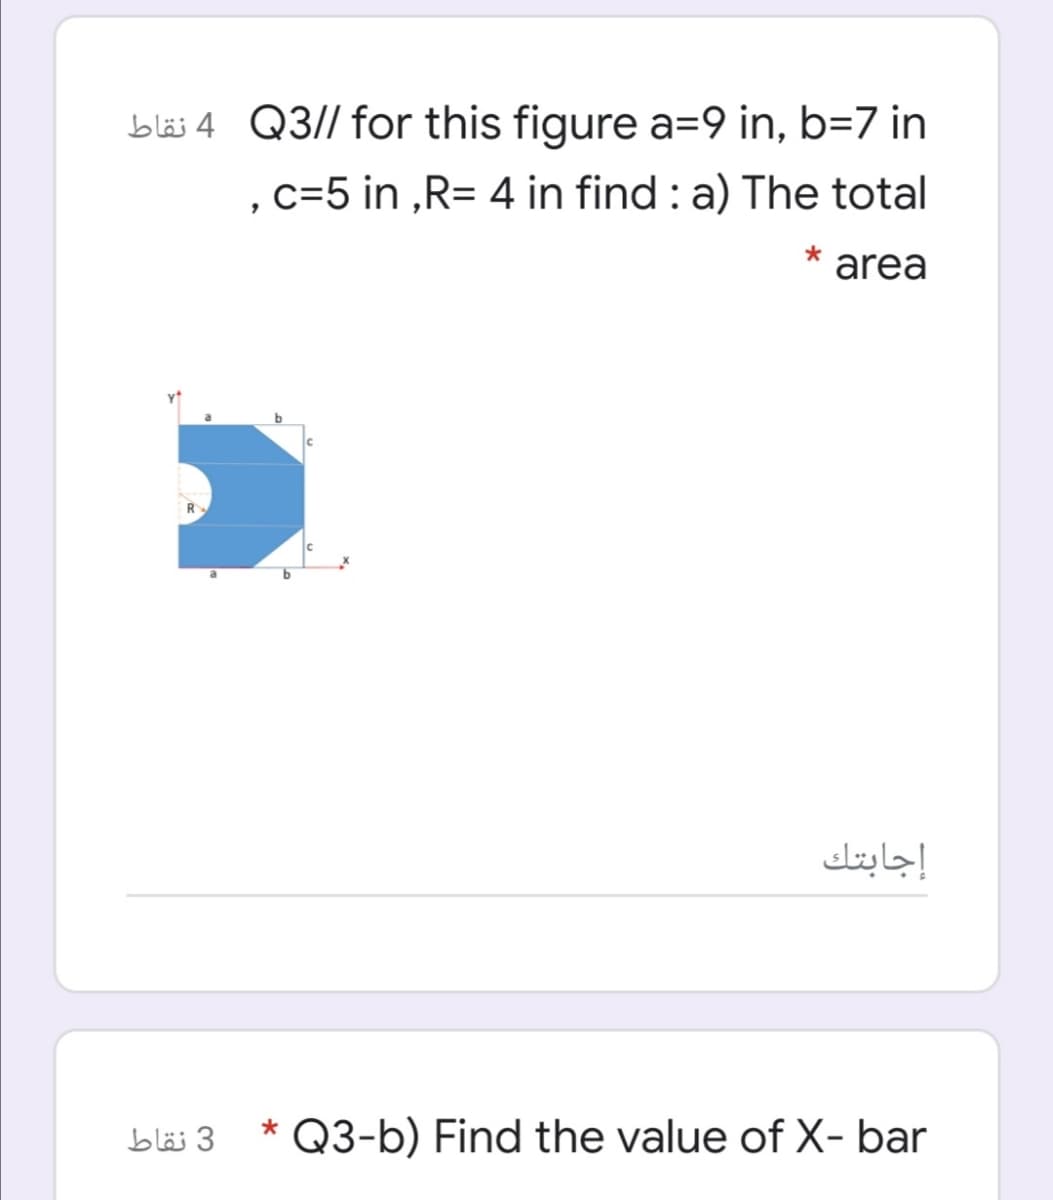 bläs 4 Q3// for this figure a=9 in, b=7 in
.c=5 in ,R= 4 in find : a) The total
area
إجابتك
3 نقاط
Q3-b) Find the value of X- bar
